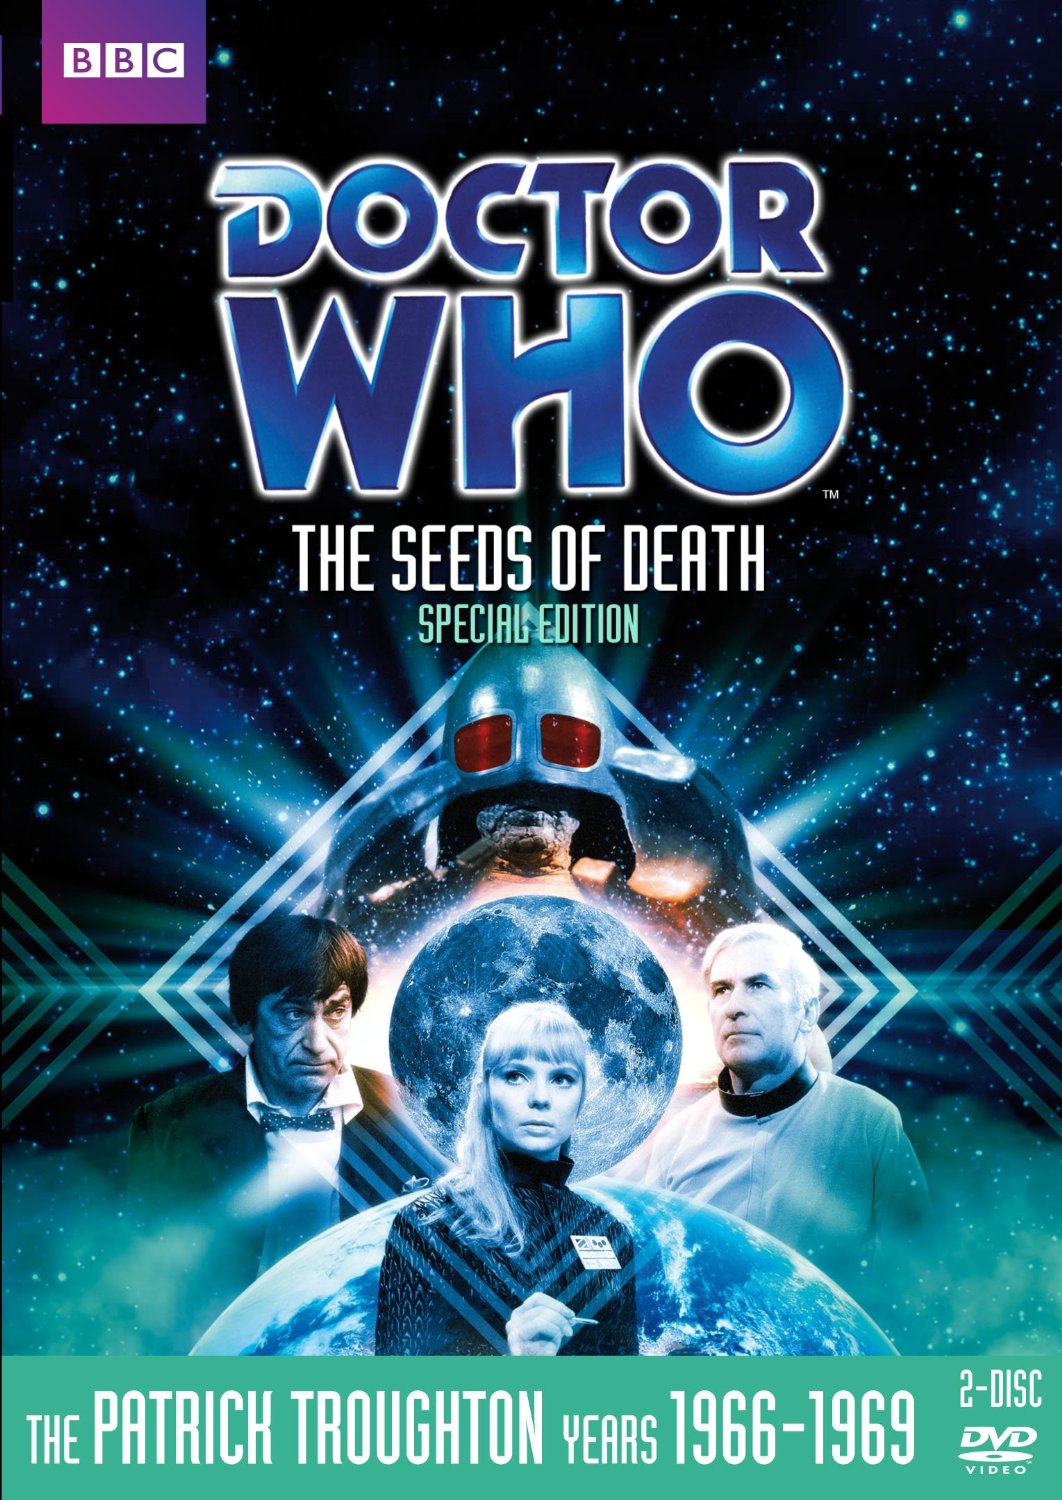 Region 1 special edition cover